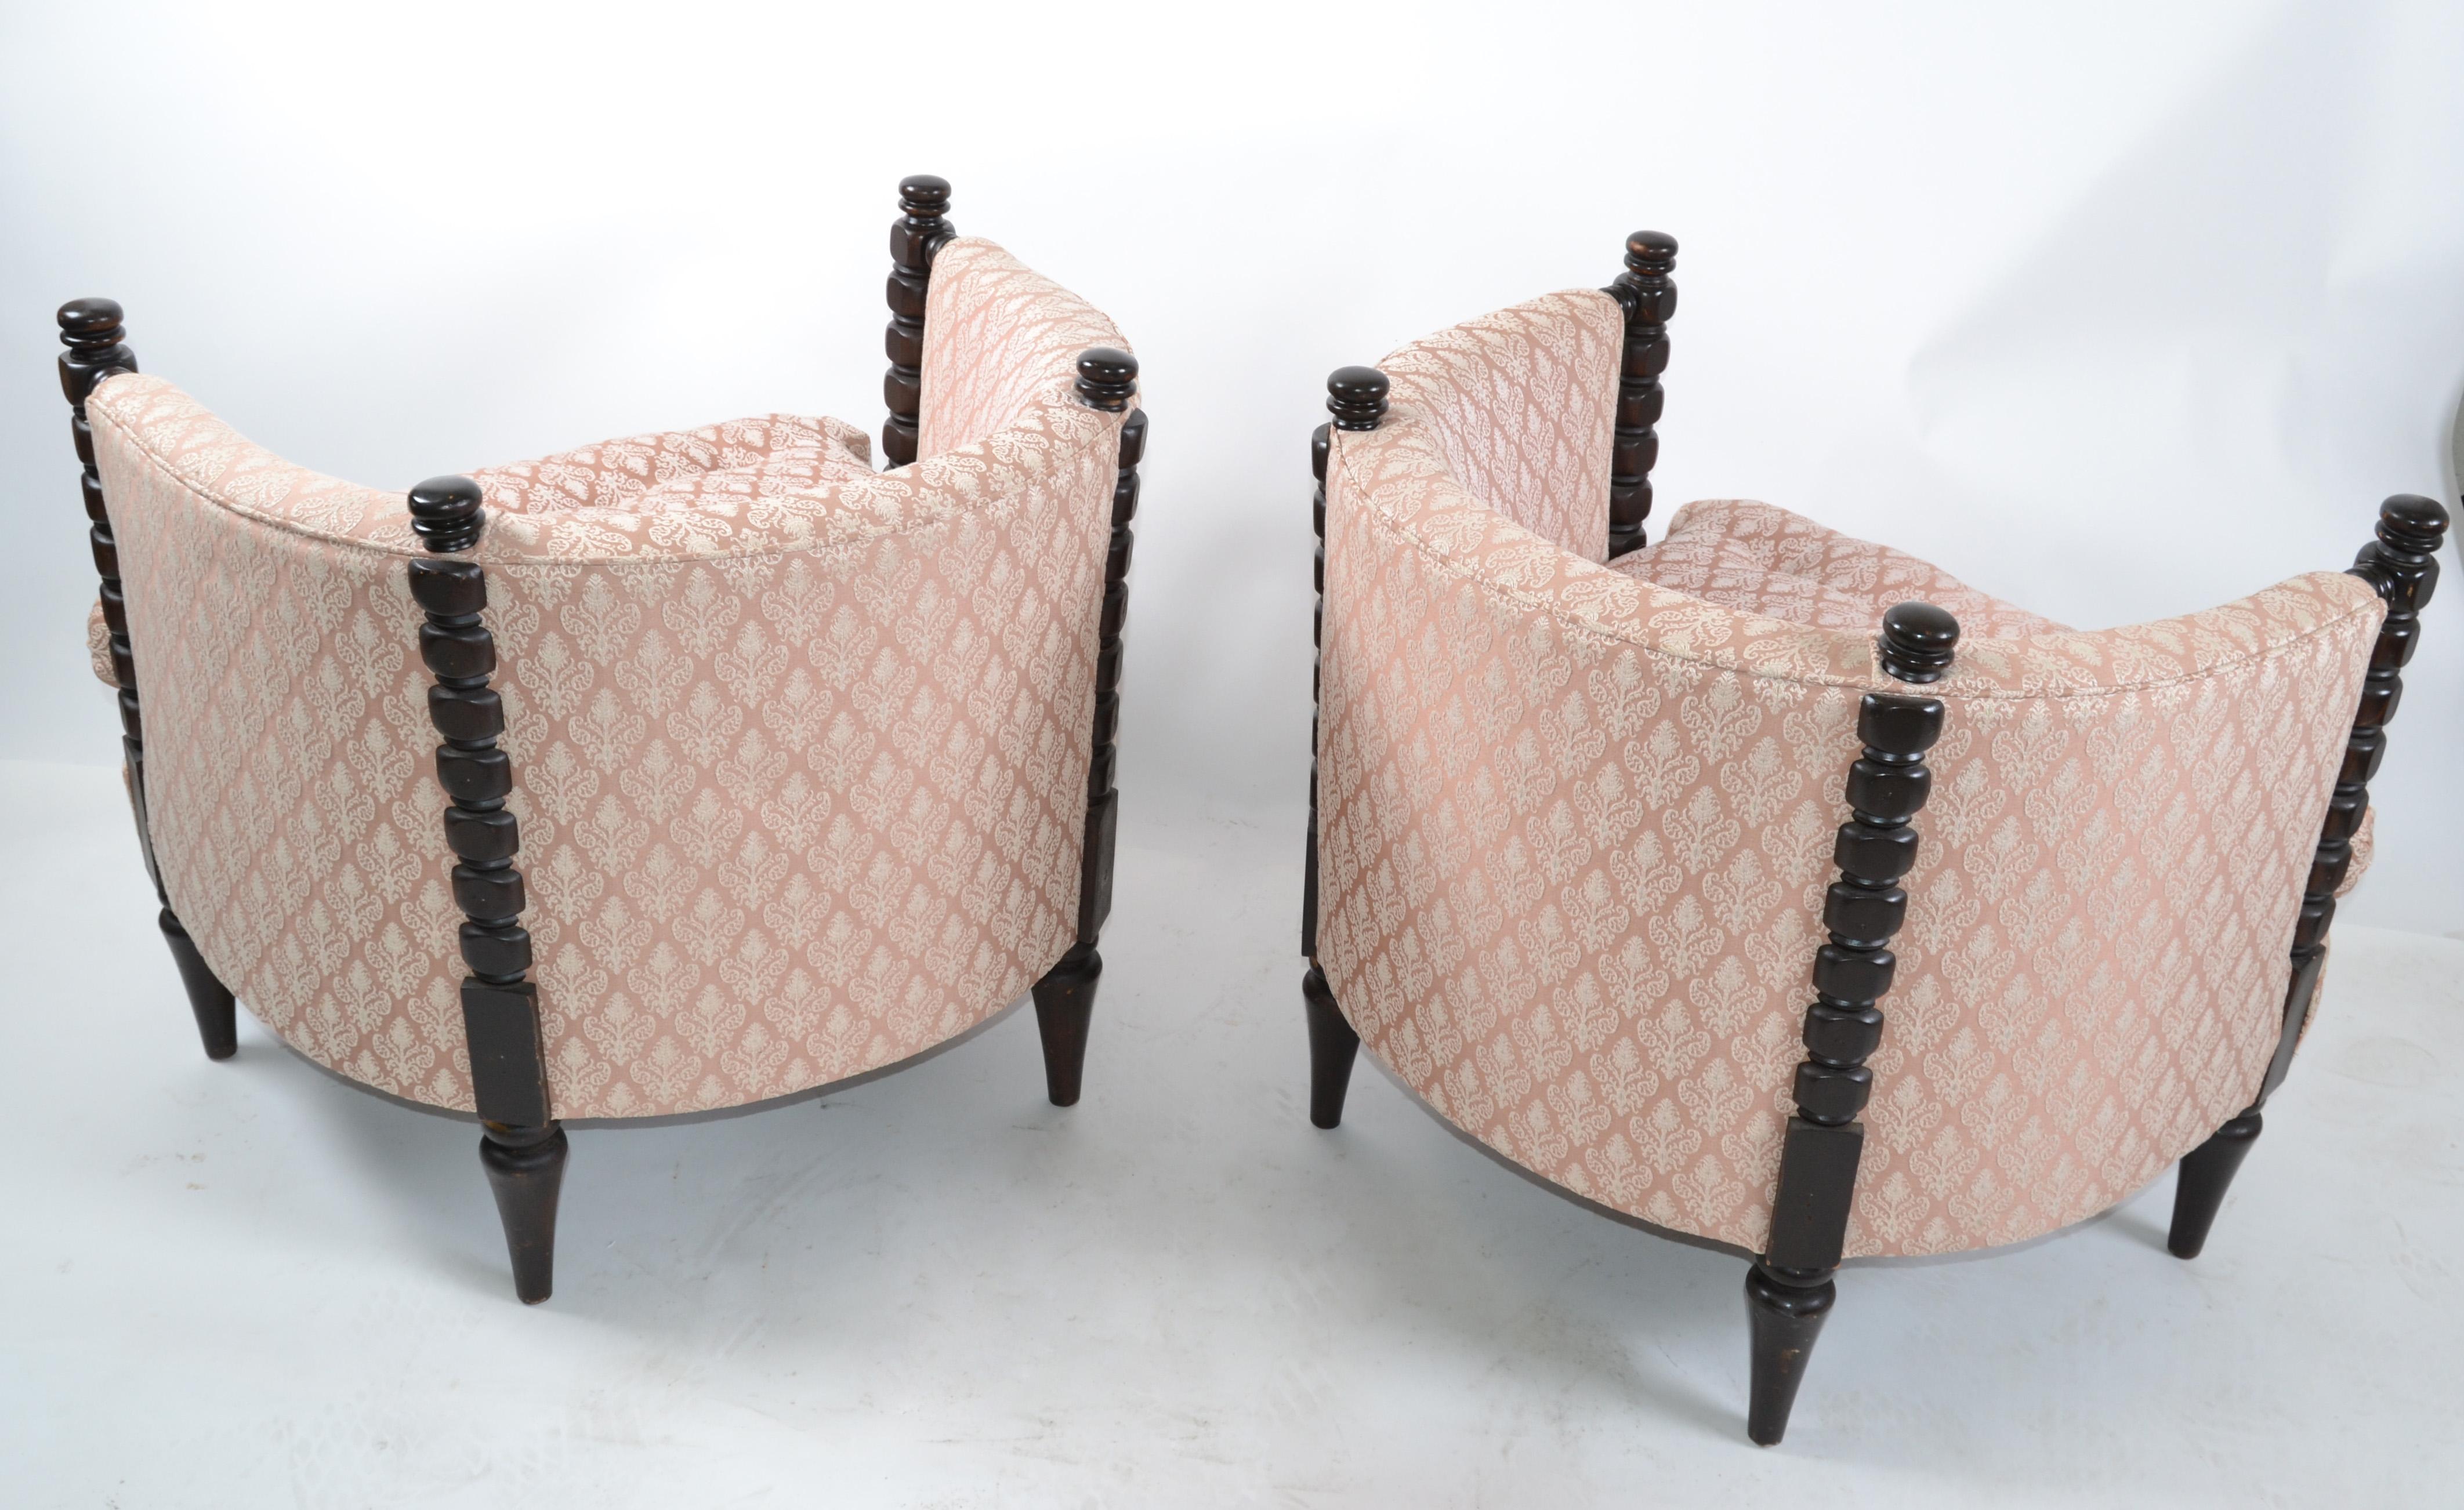 1950s Turned Wood and Tufted Fabric Upholstery Barrel Chairs, Club Chairs, Pair 1